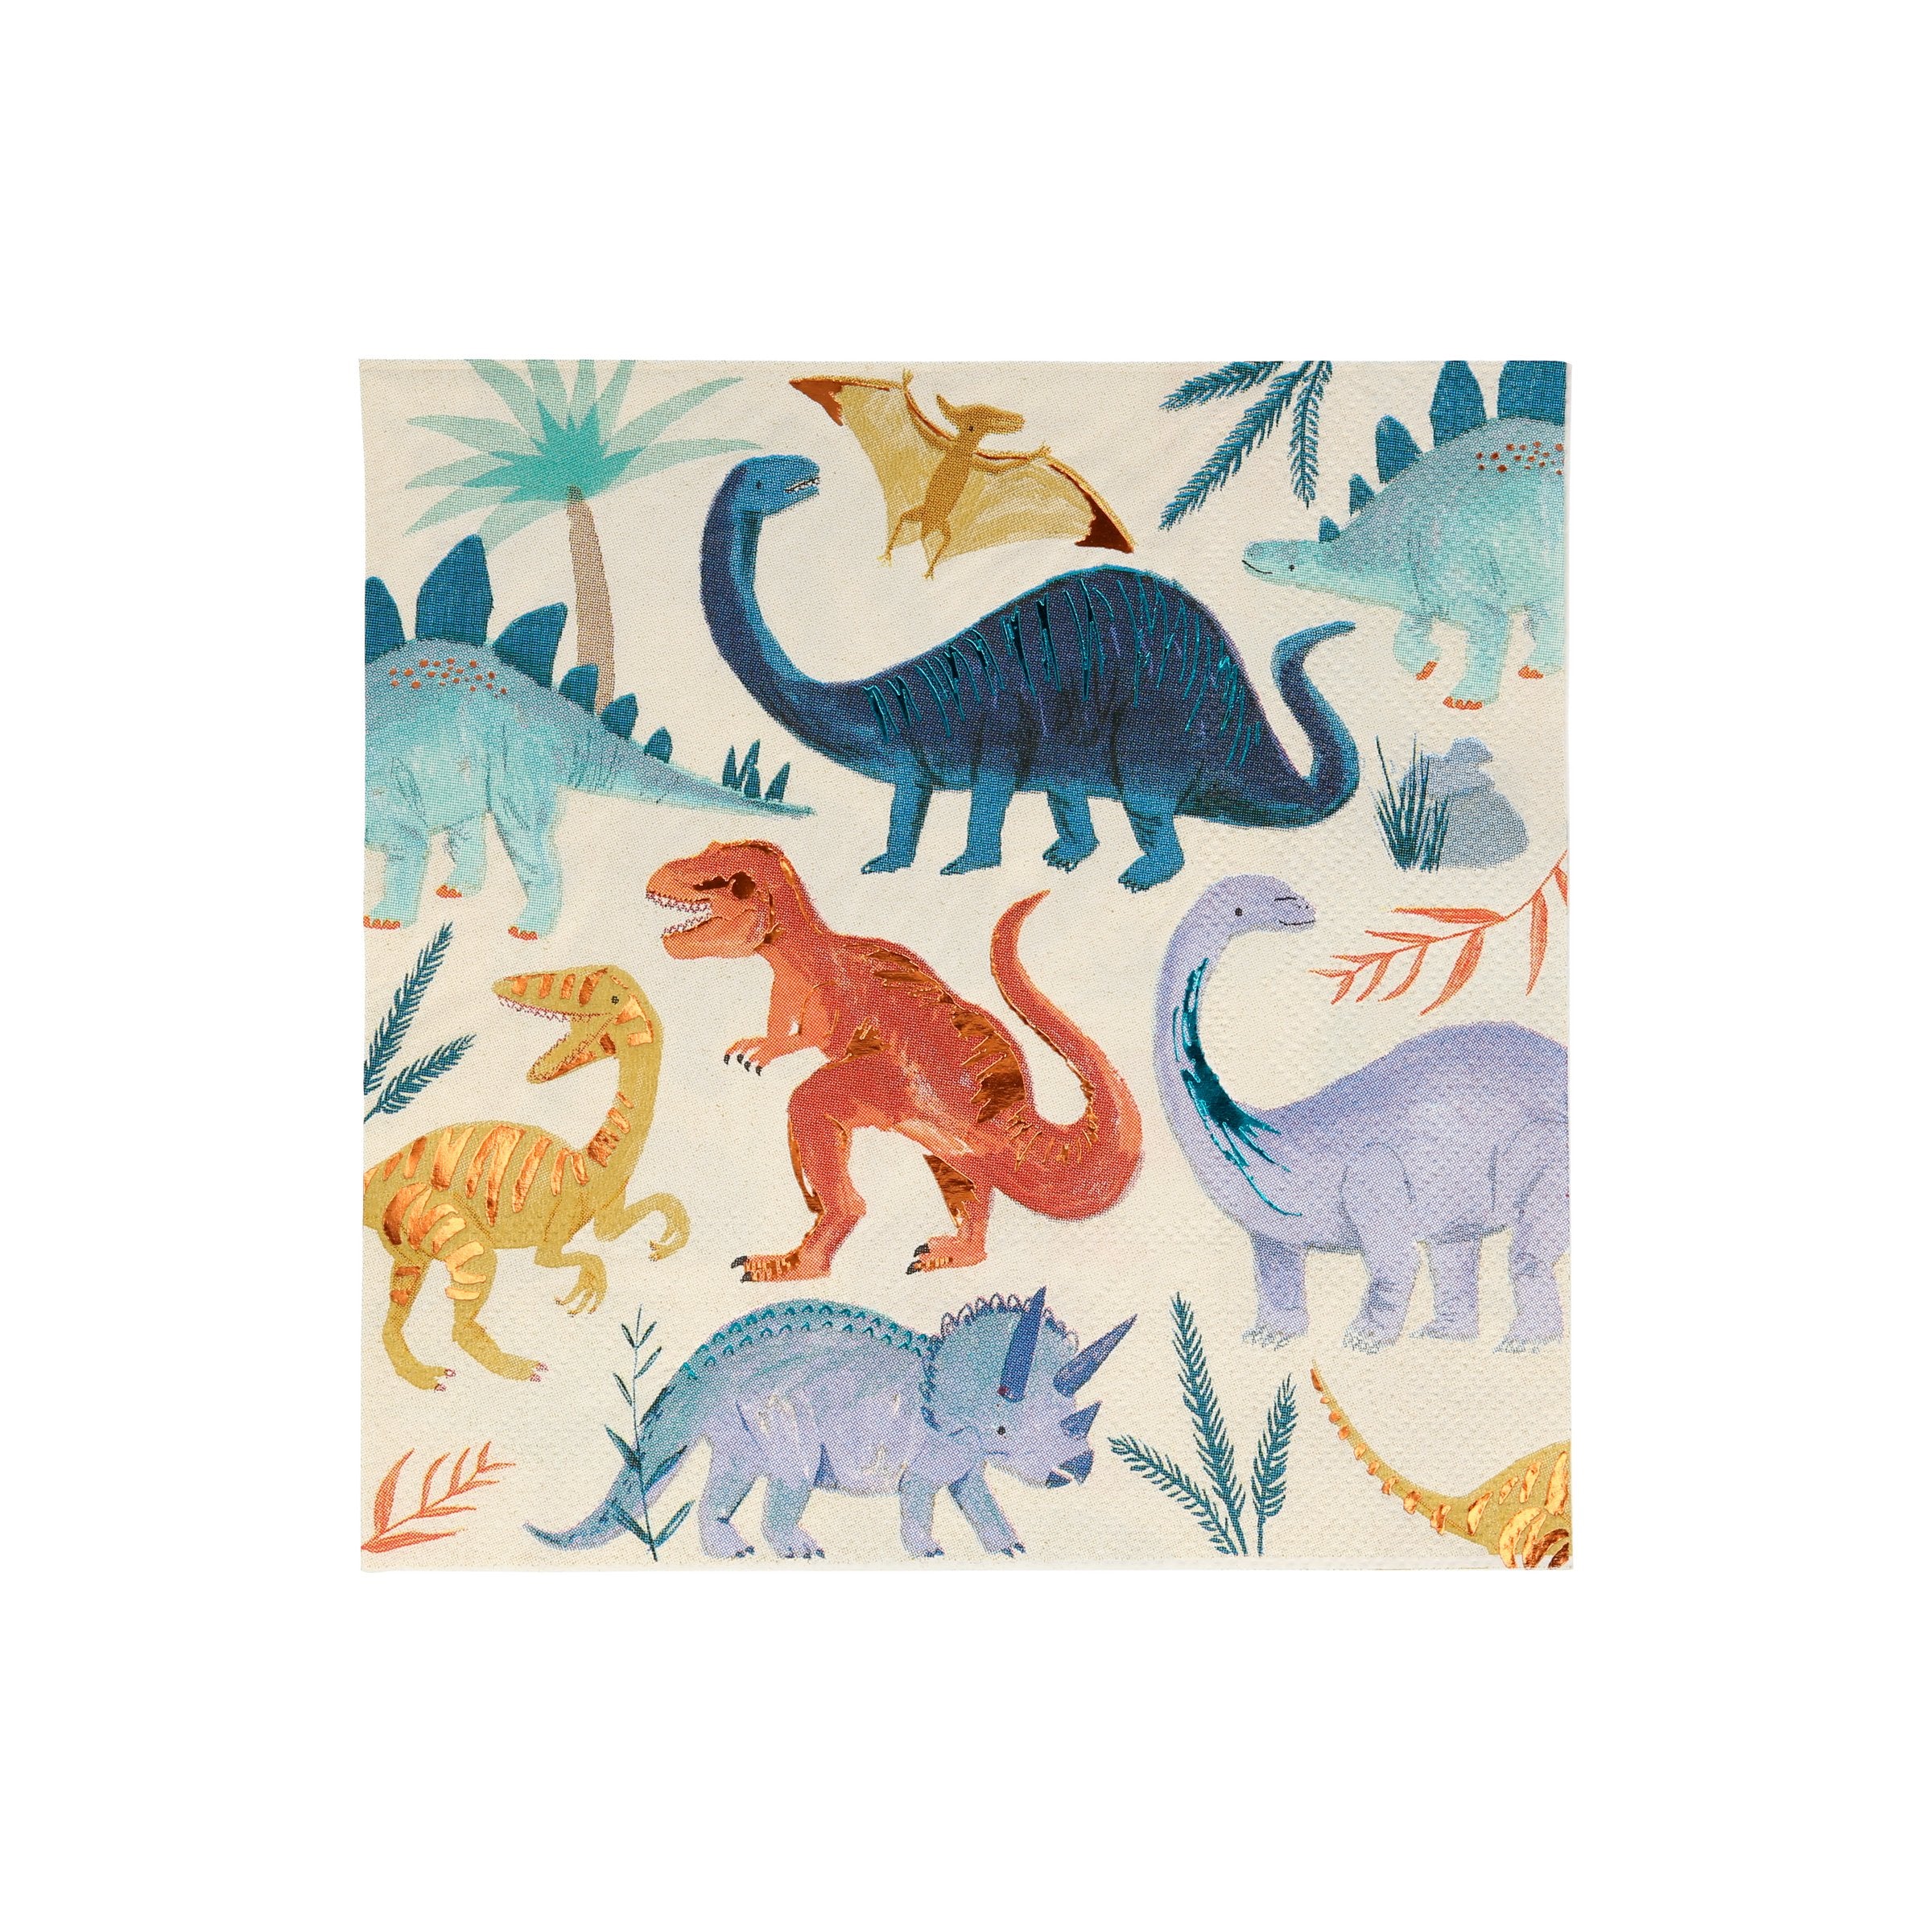 If you're looking for dinosaur party decoration ideas, then you'll our colorful dinosaur paper napkins.